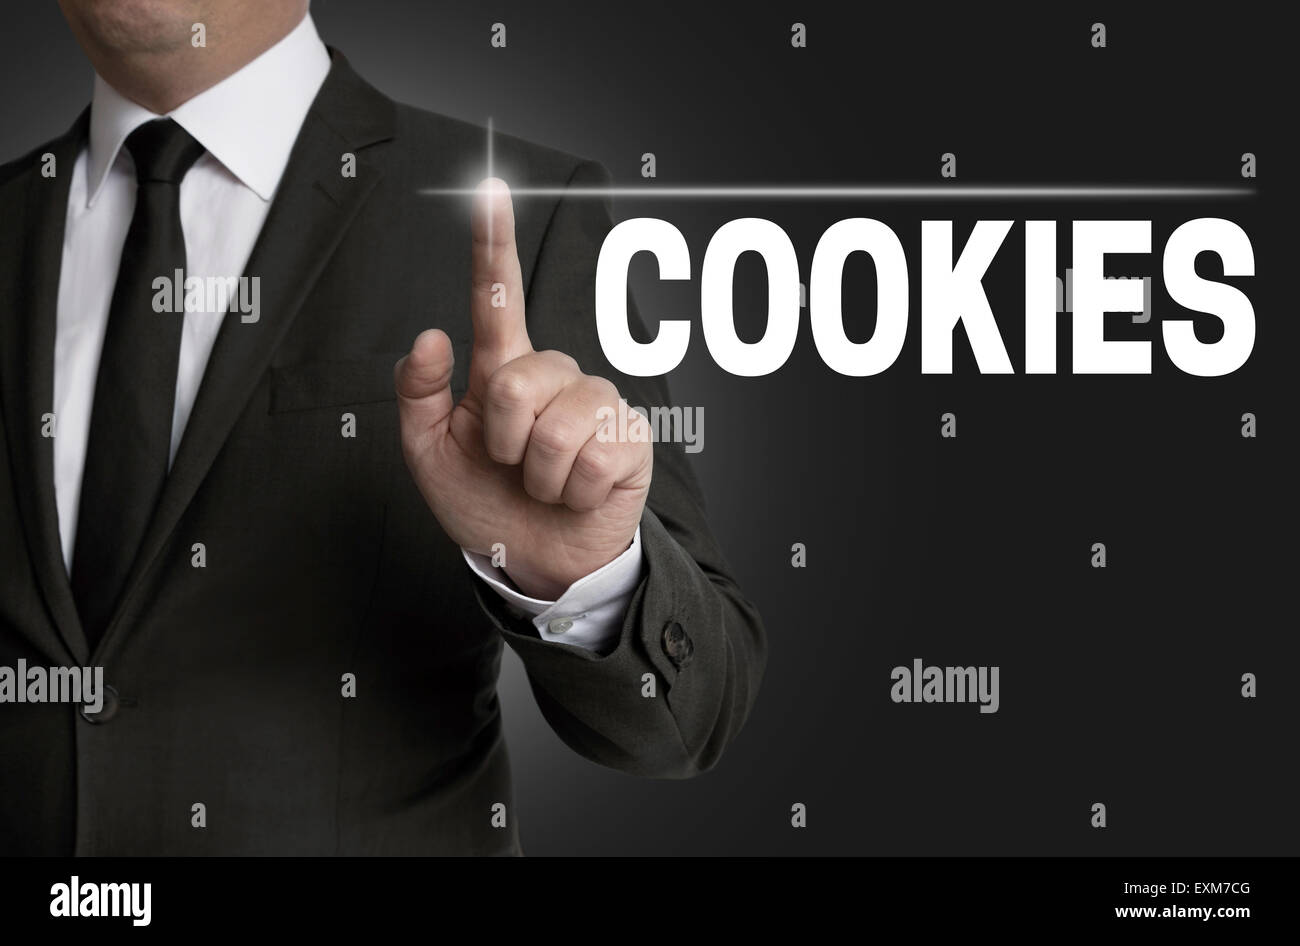 cookies touchscreen is operated by businessman. Stock Photo